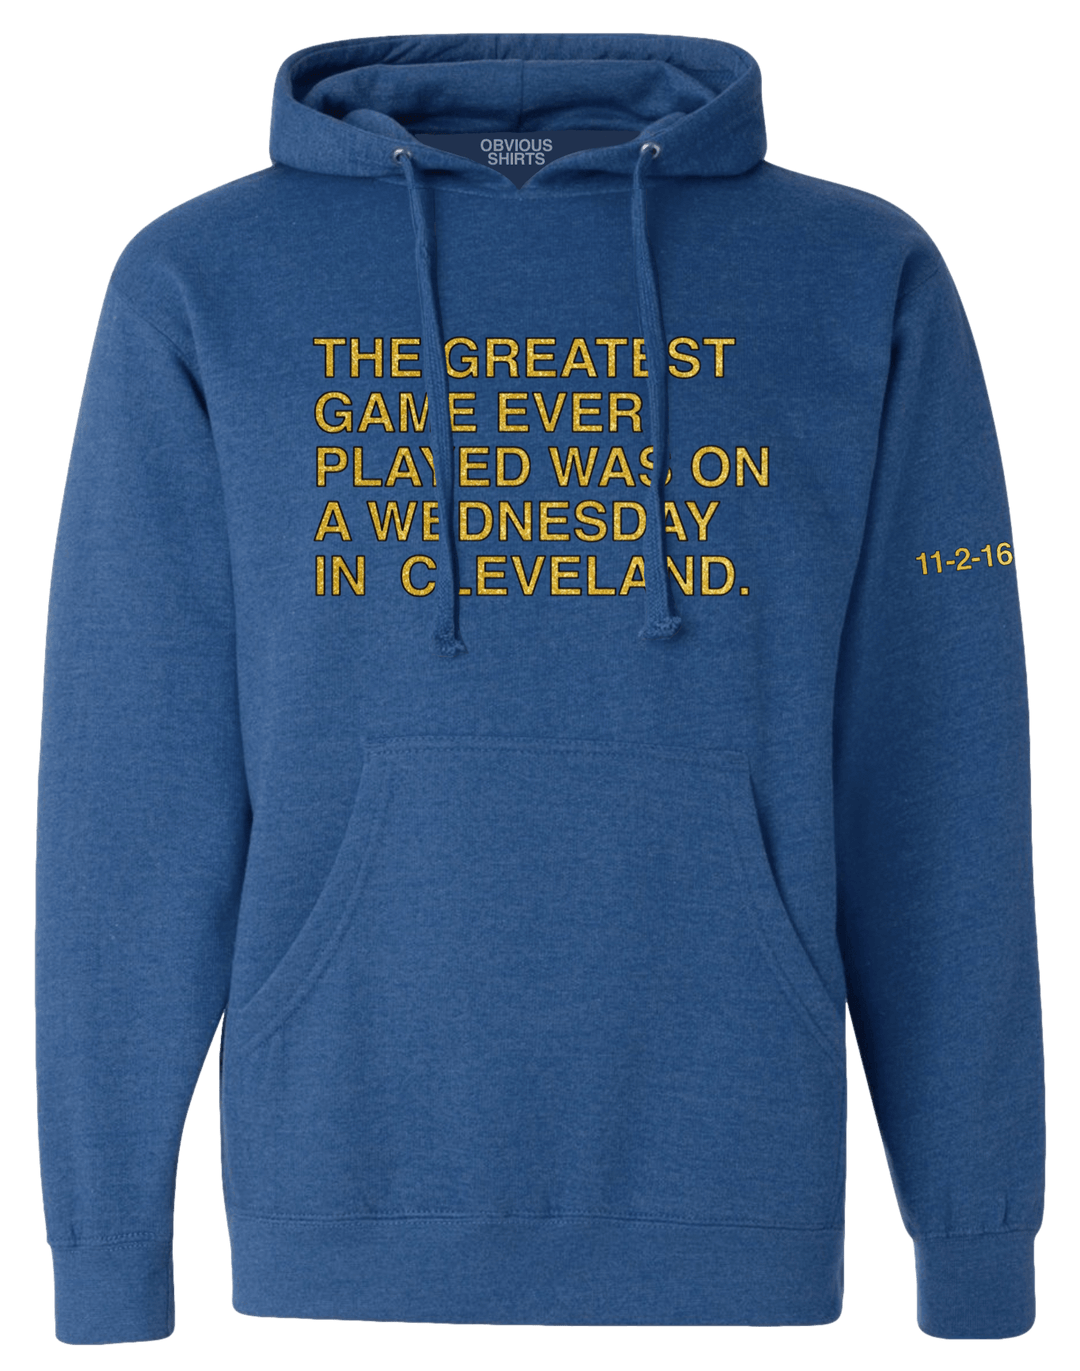 THE GREATEST GAME EVER PLAYED - ANNIVERSARY EDITION (HOODED SWEATSHIRT) - OBVIOUS SHIRTS